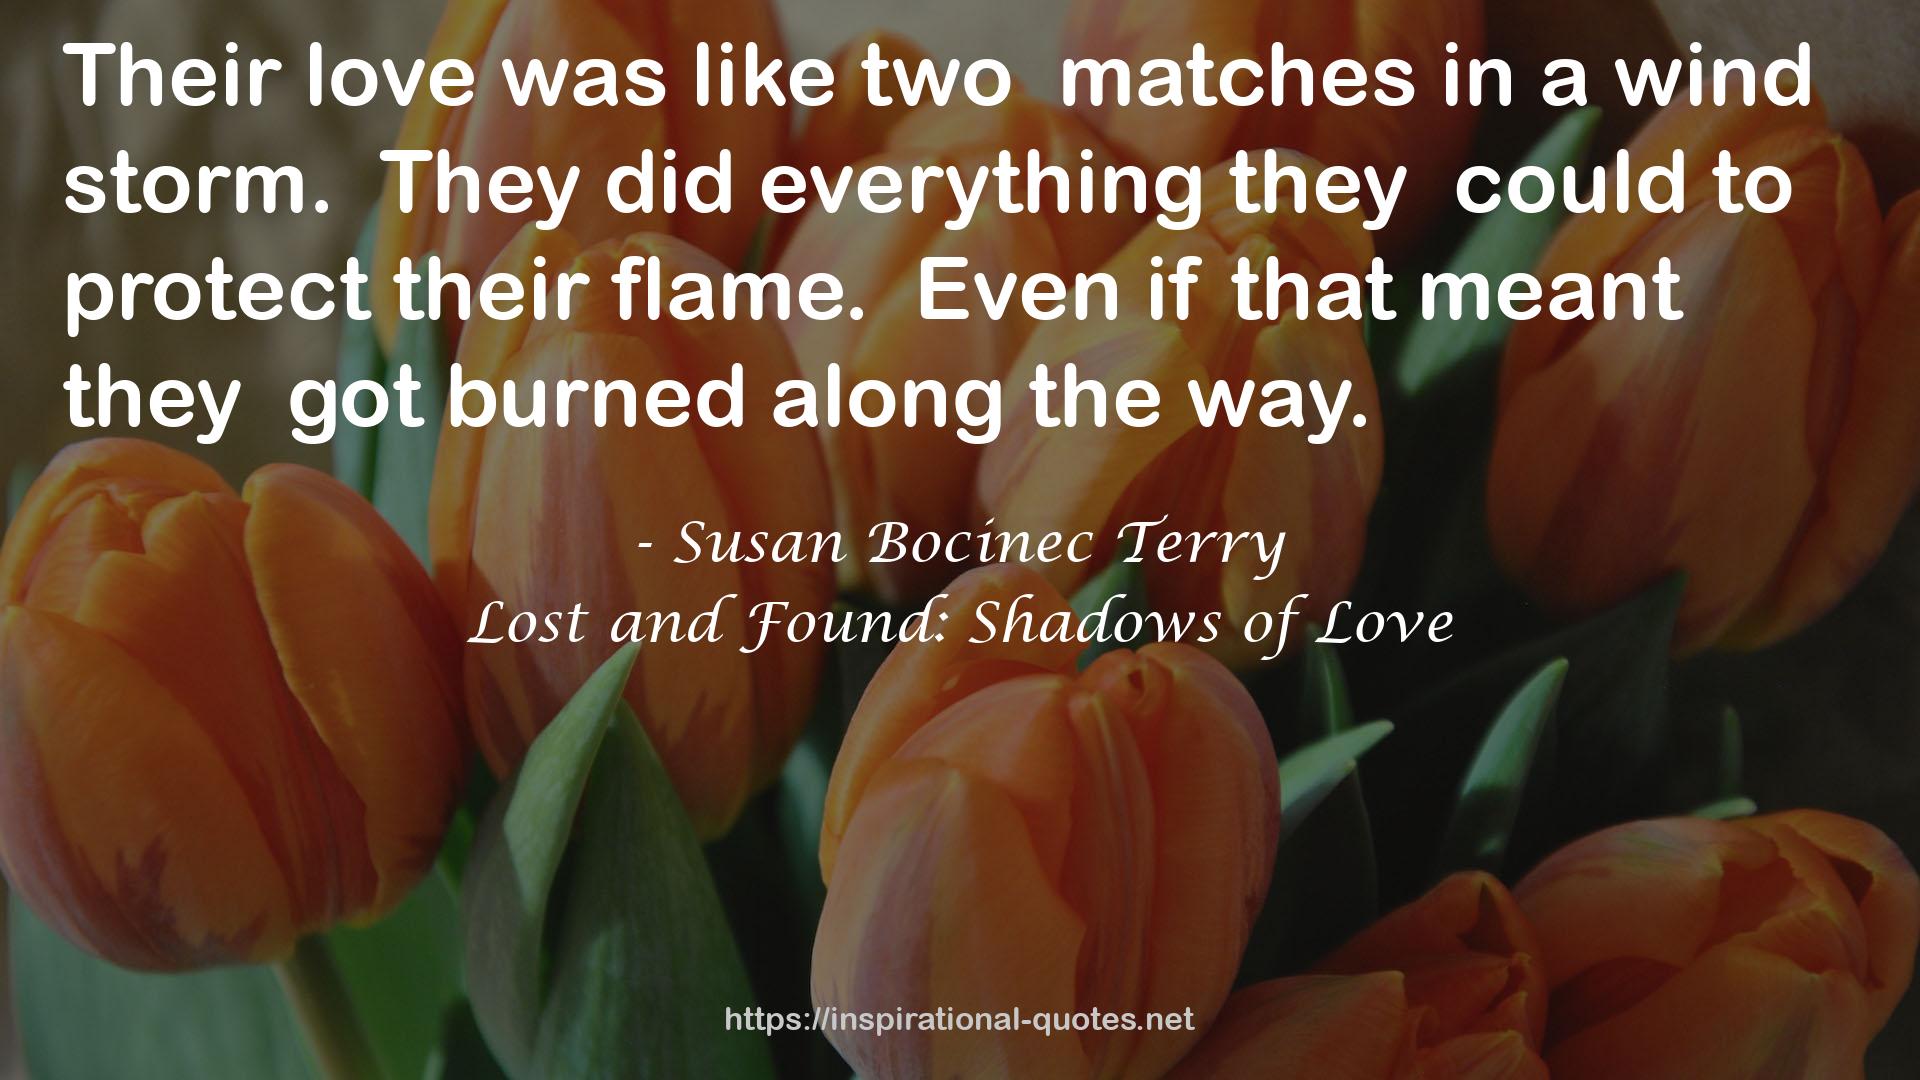 Lost and Found: Shadows of Love QUOTES